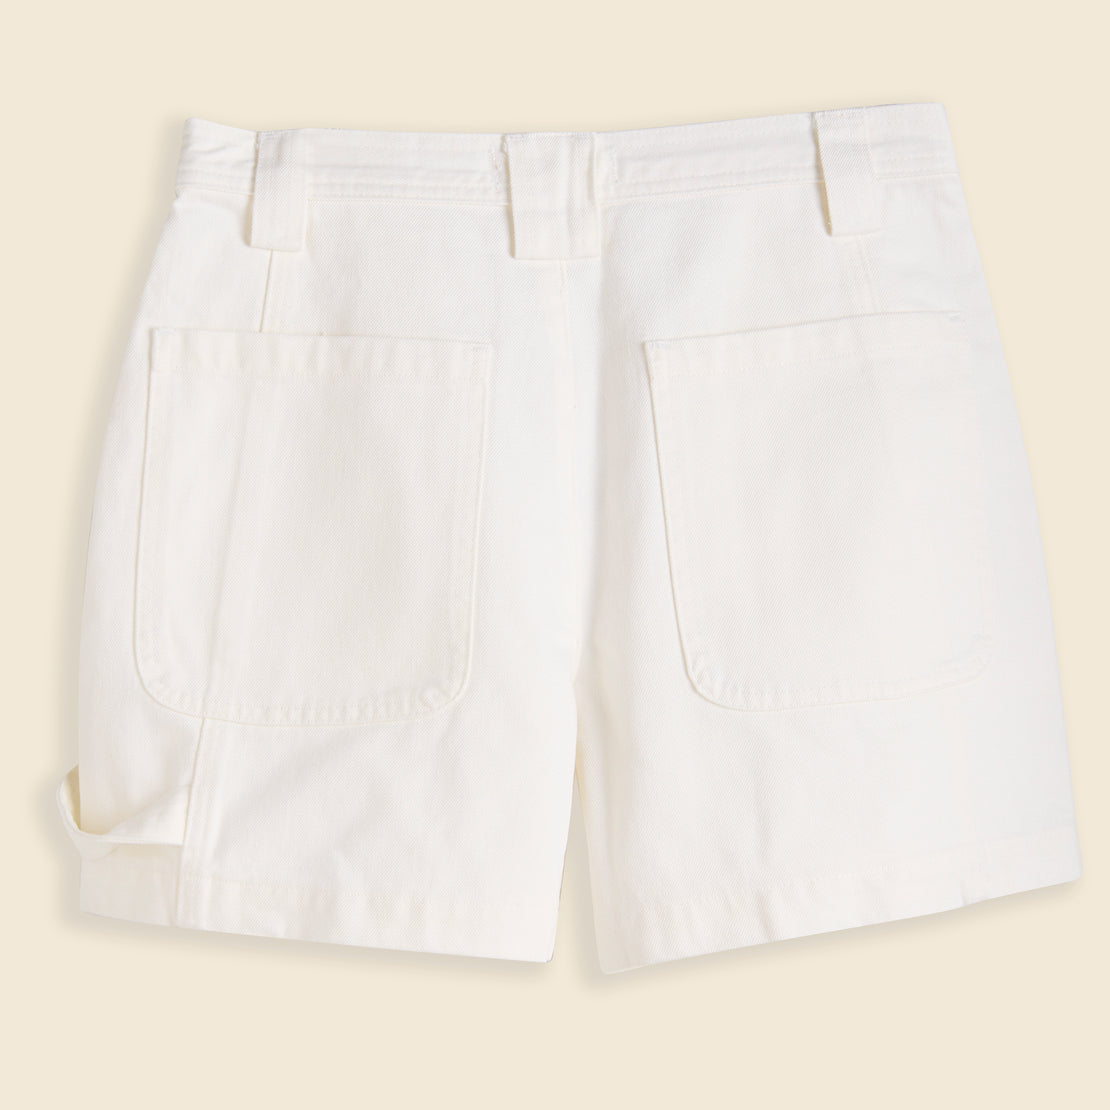 Phoebe Short in Denim - White - Alex Mill - STAG Provisions - W - Shorts - Solid